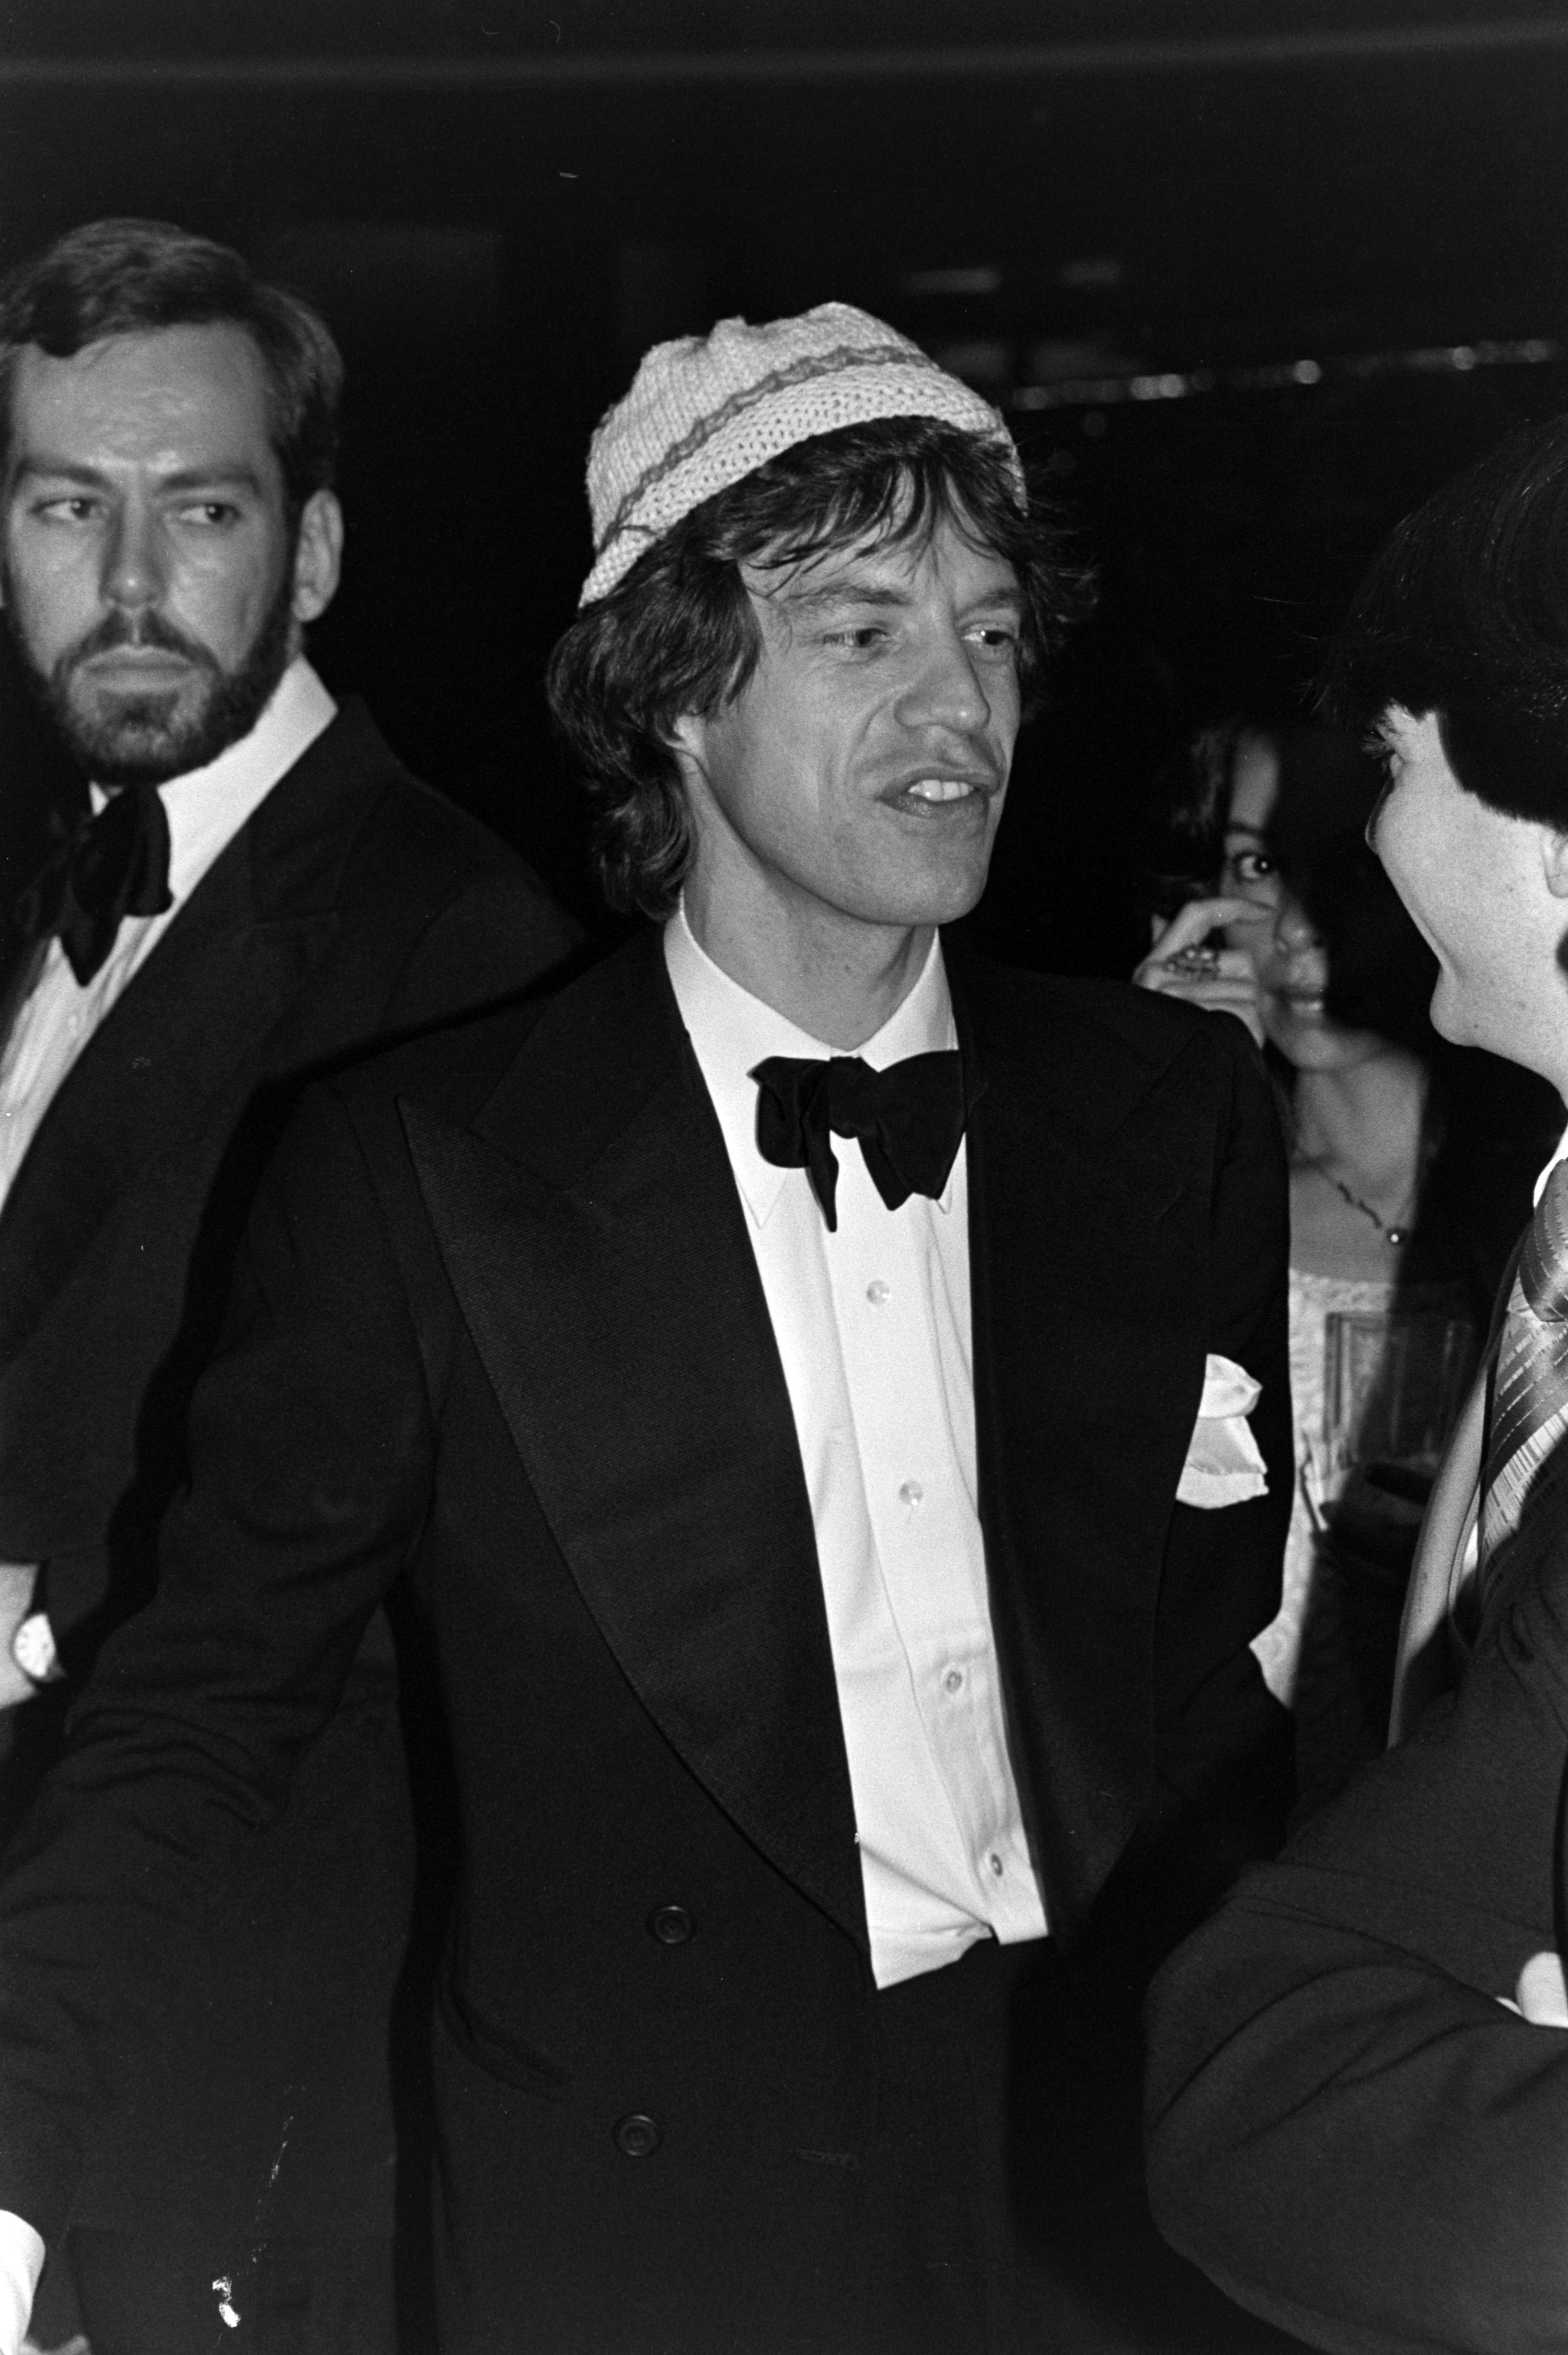 Mick with a bow tie and wearing a hat